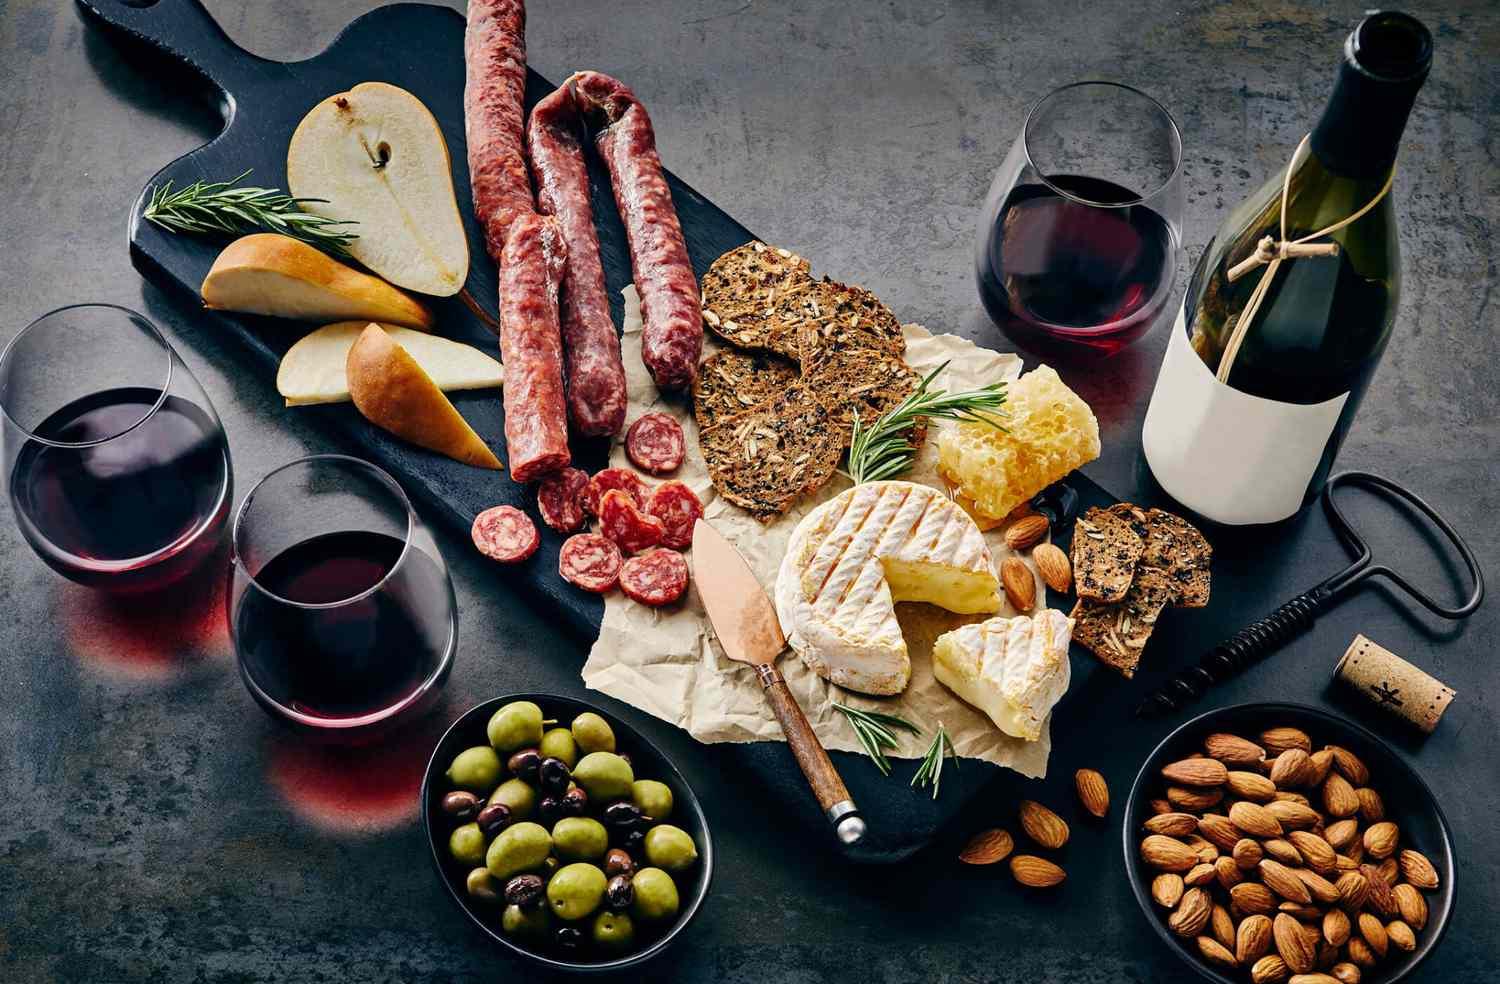 A Symphony of Flavors: Explore Unique Wine and Cheese Board Pairings - CheeseButta - Gourmet Products